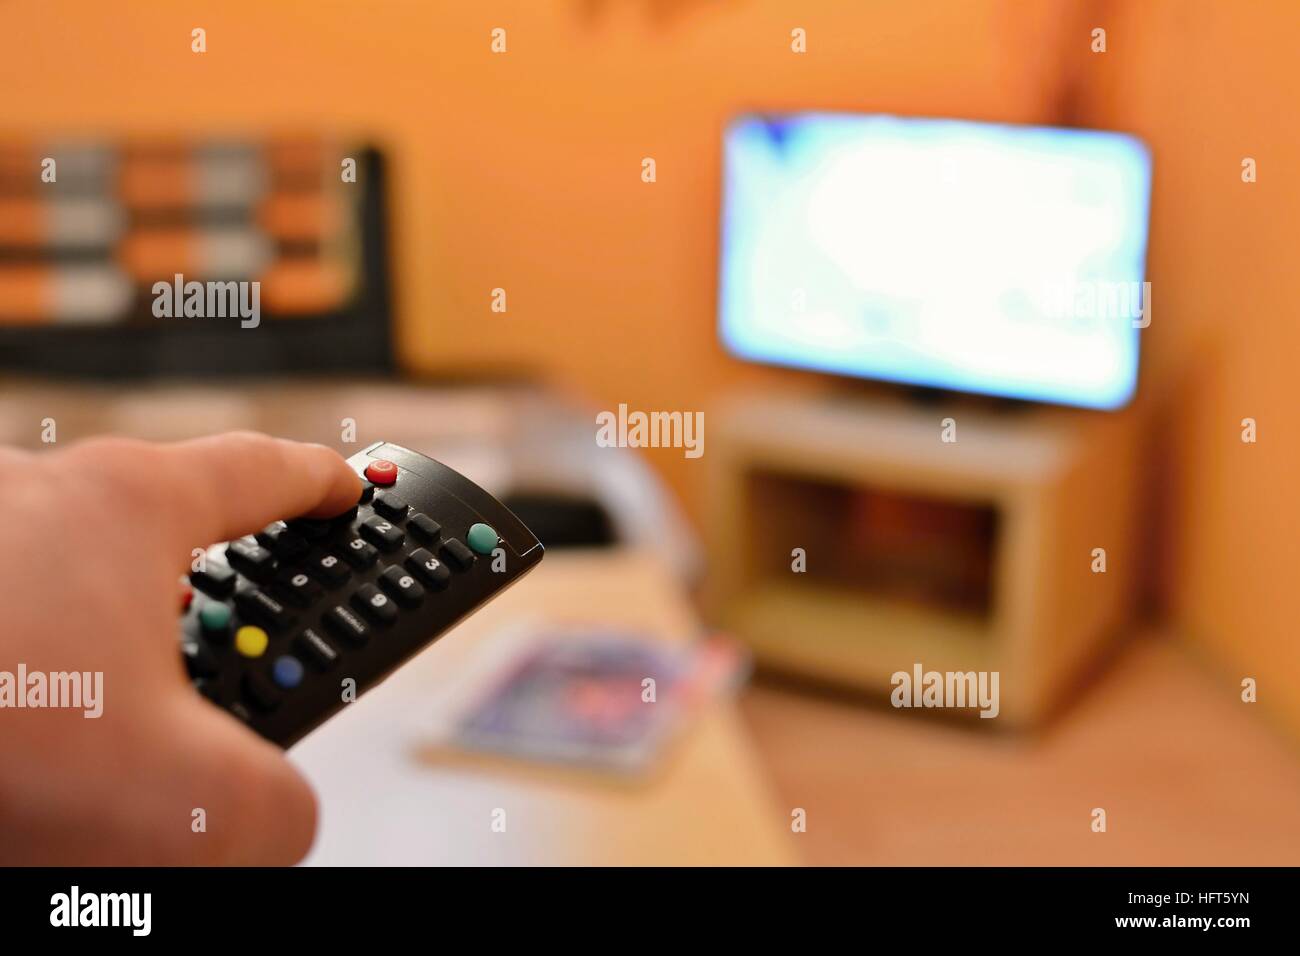 Holding the TV remote control and switching the channel on television. Stock Photo